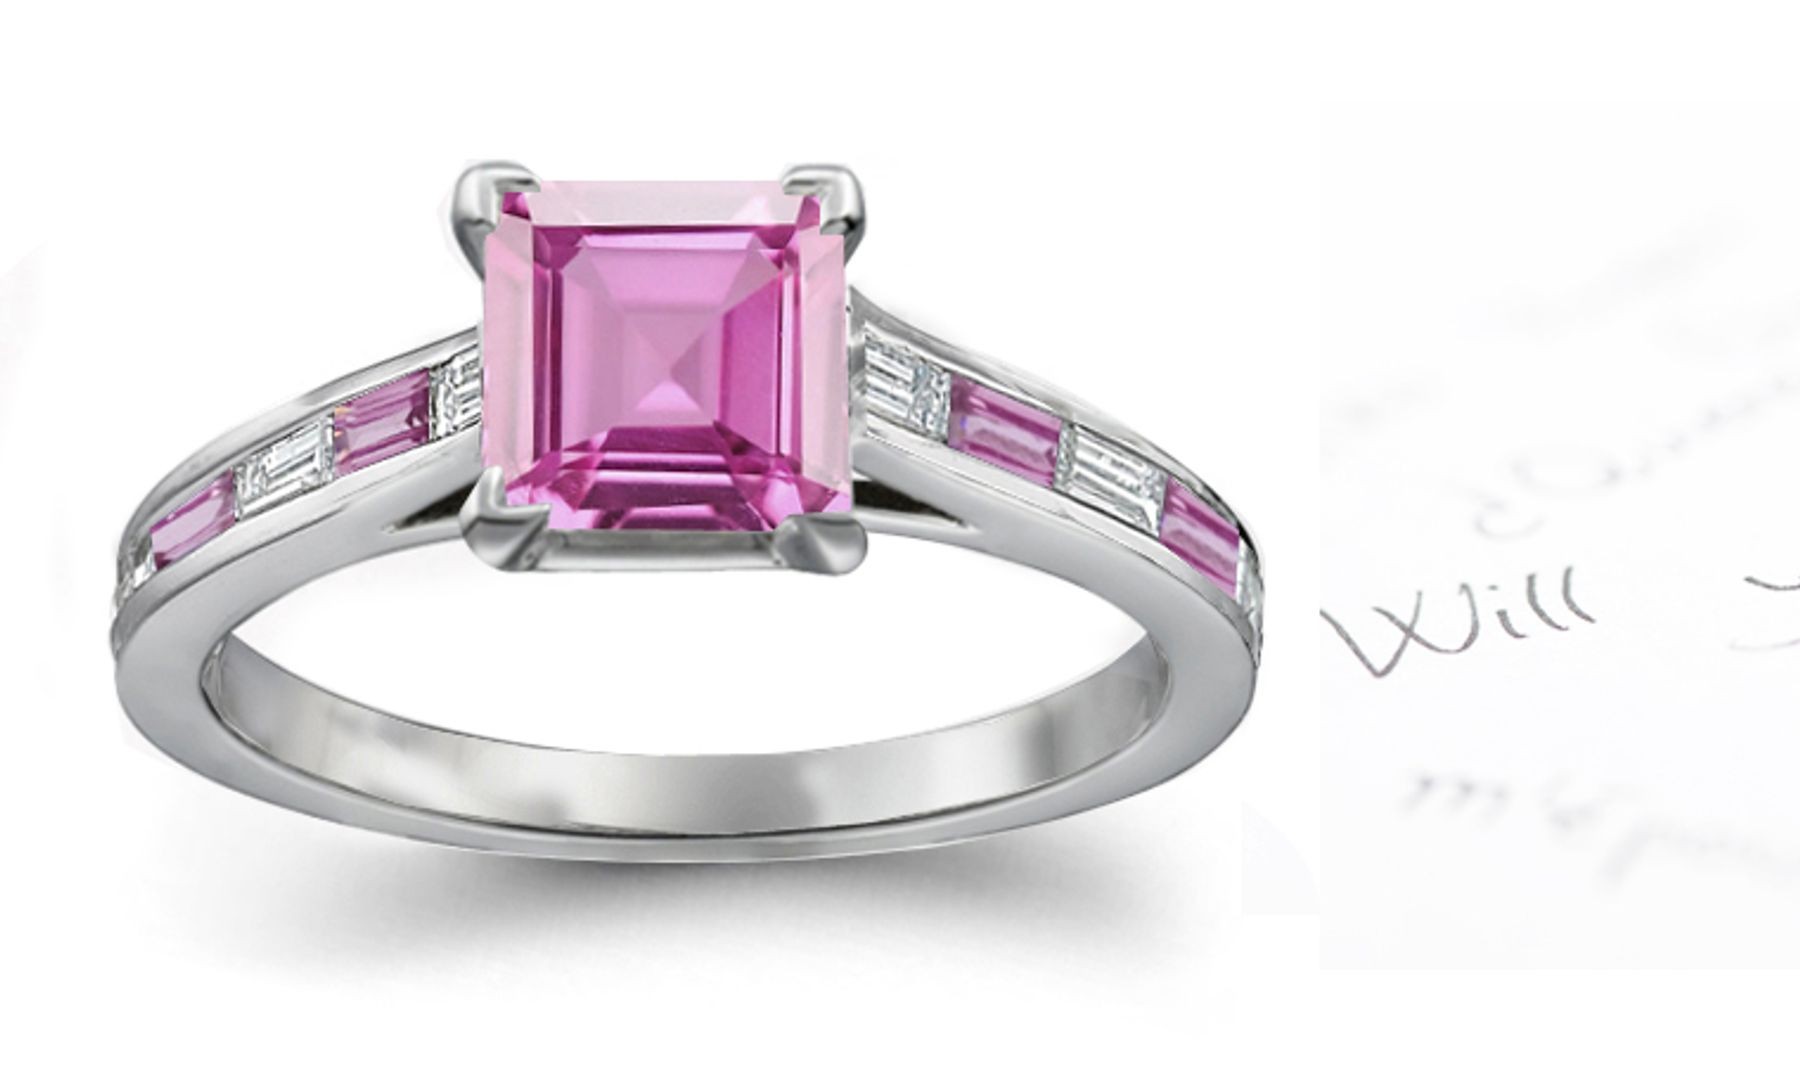 The Embrace Ring: Princess Cut Pink Sapphire & Baguette White Diamond Ring in Gold